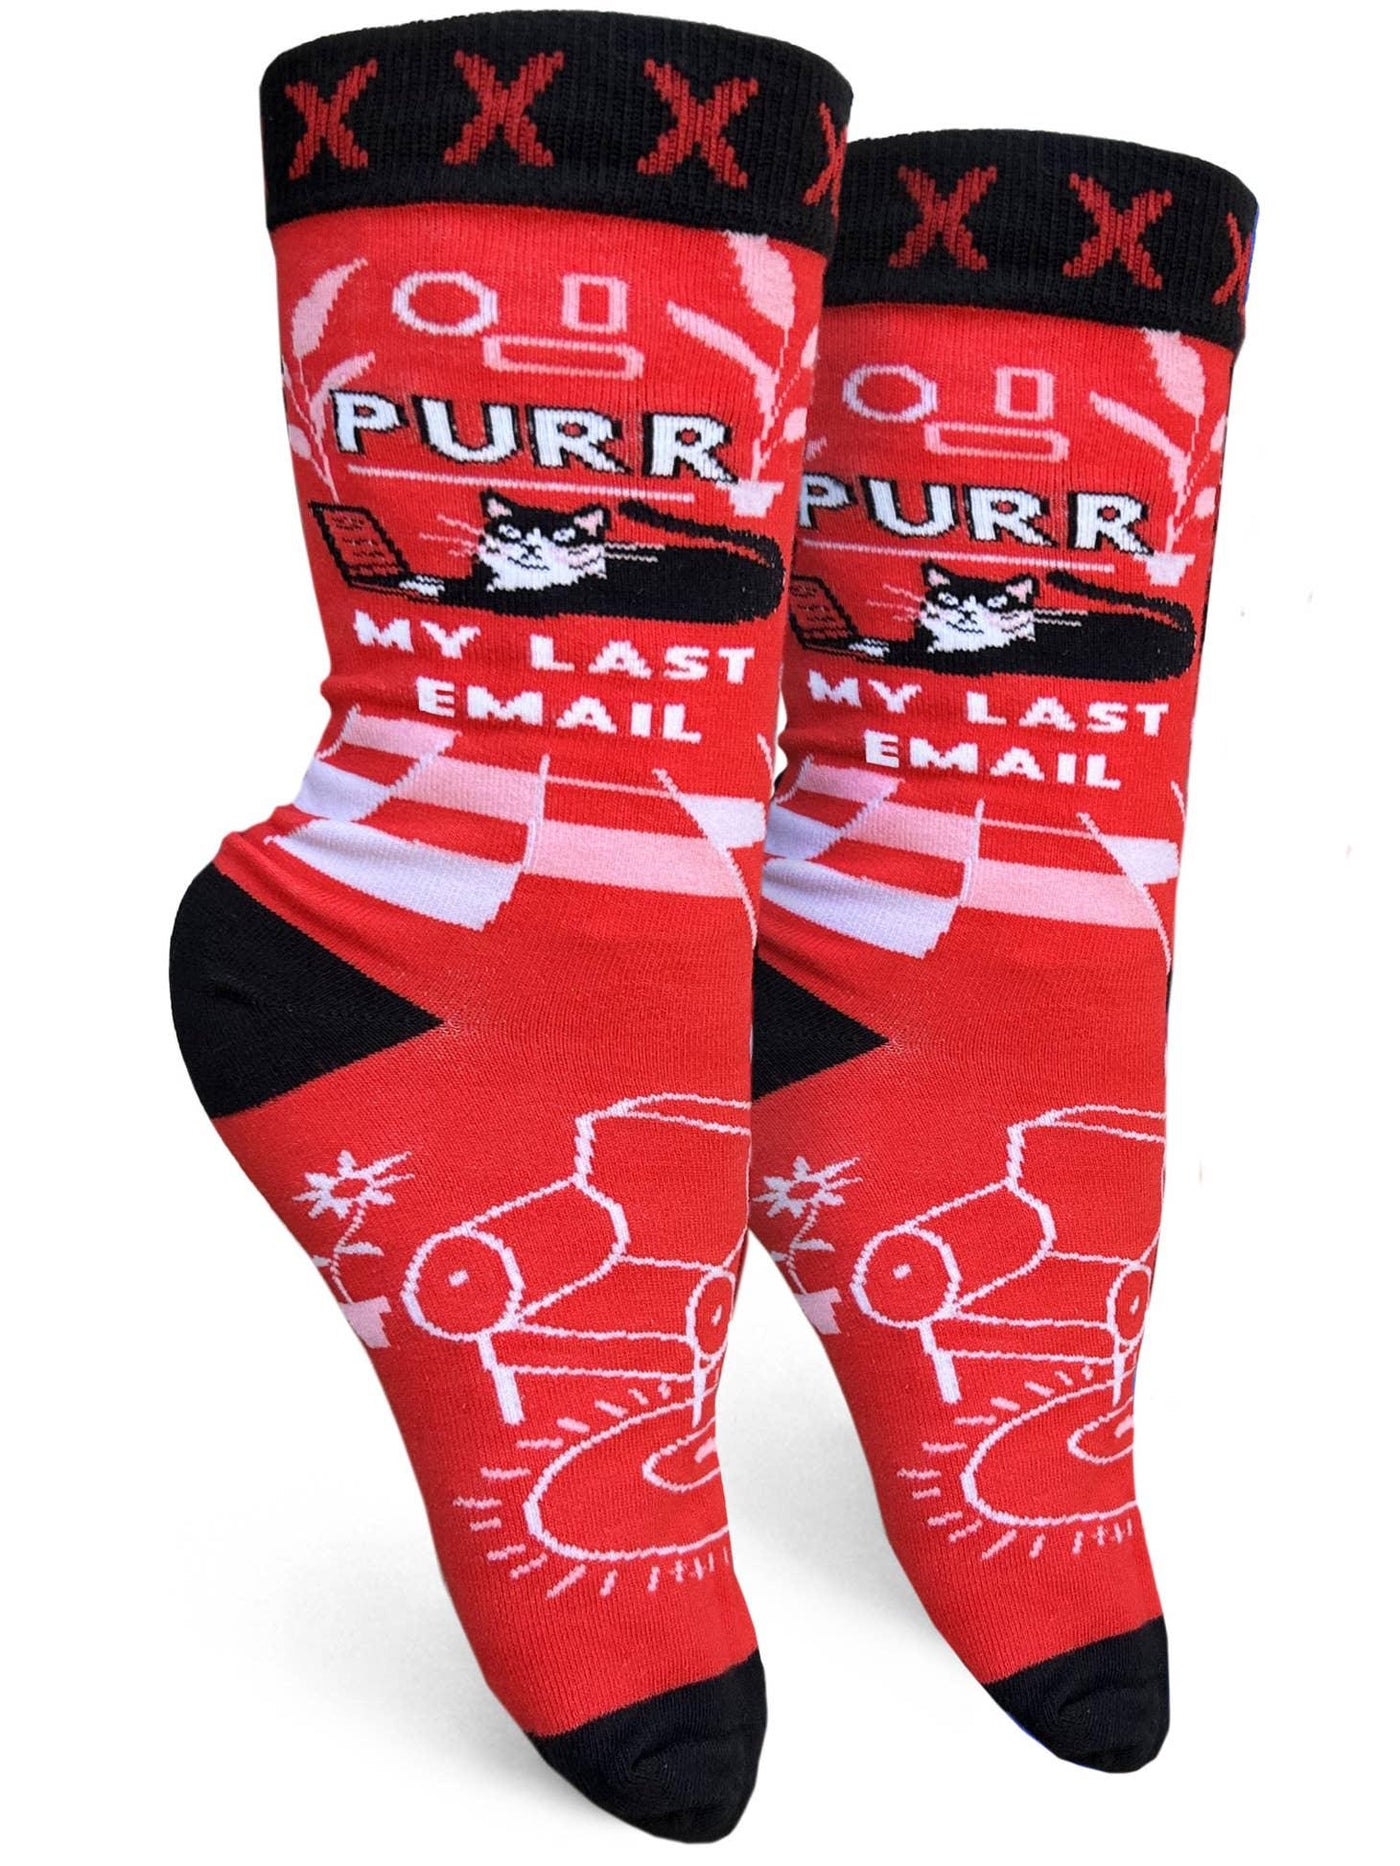 Purr My Last Email, Womens Crew - Groovy Things - The Sock Monster